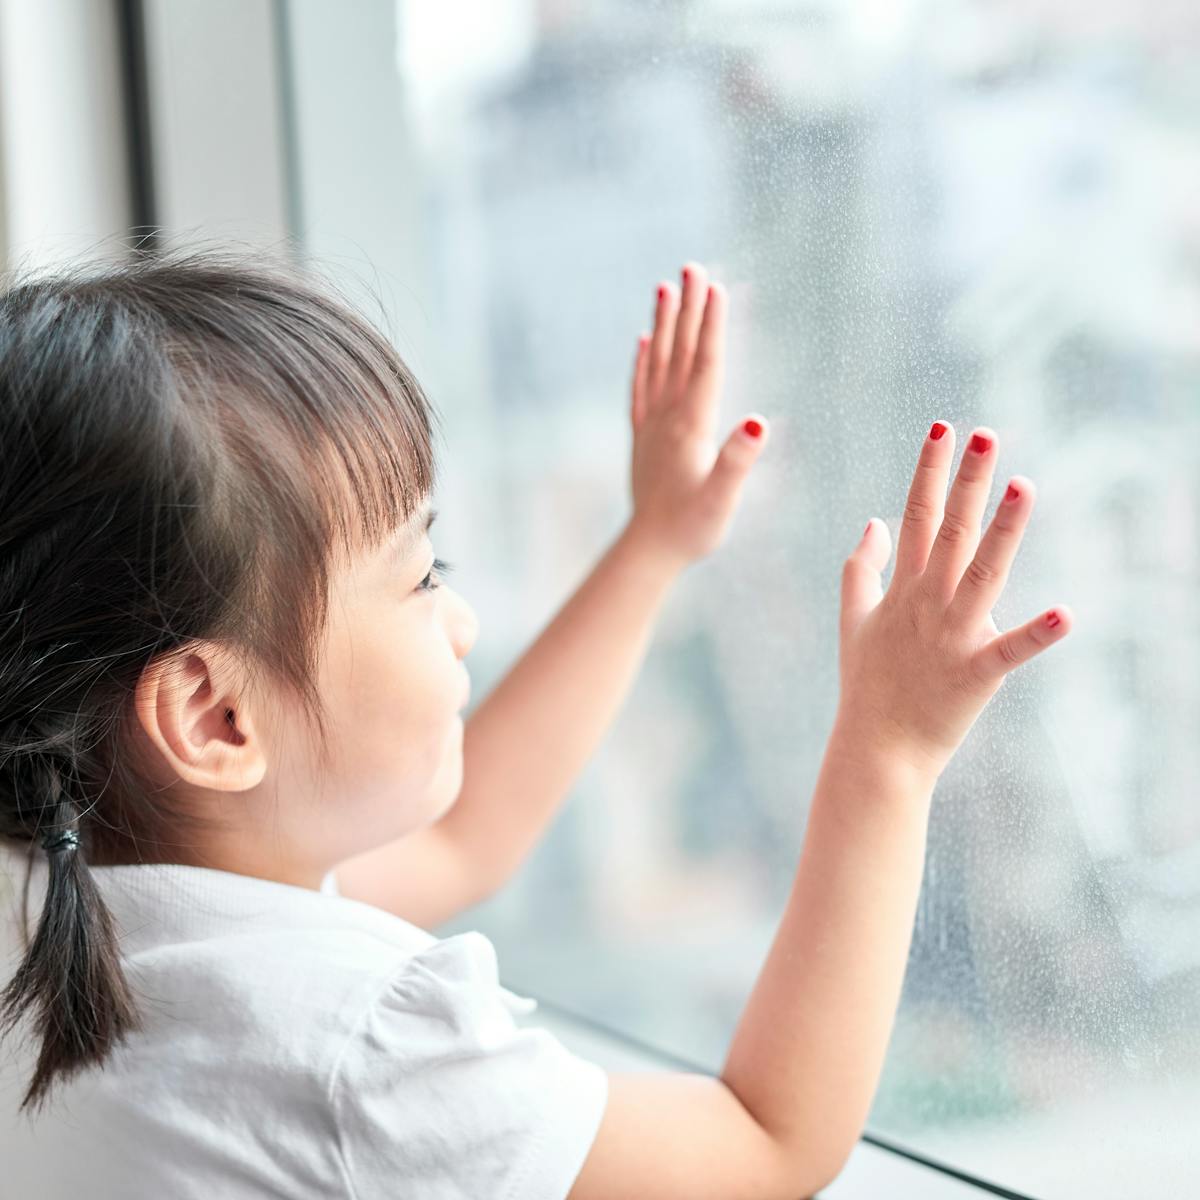 Curious Kids: why do we have fingernails and toenails?